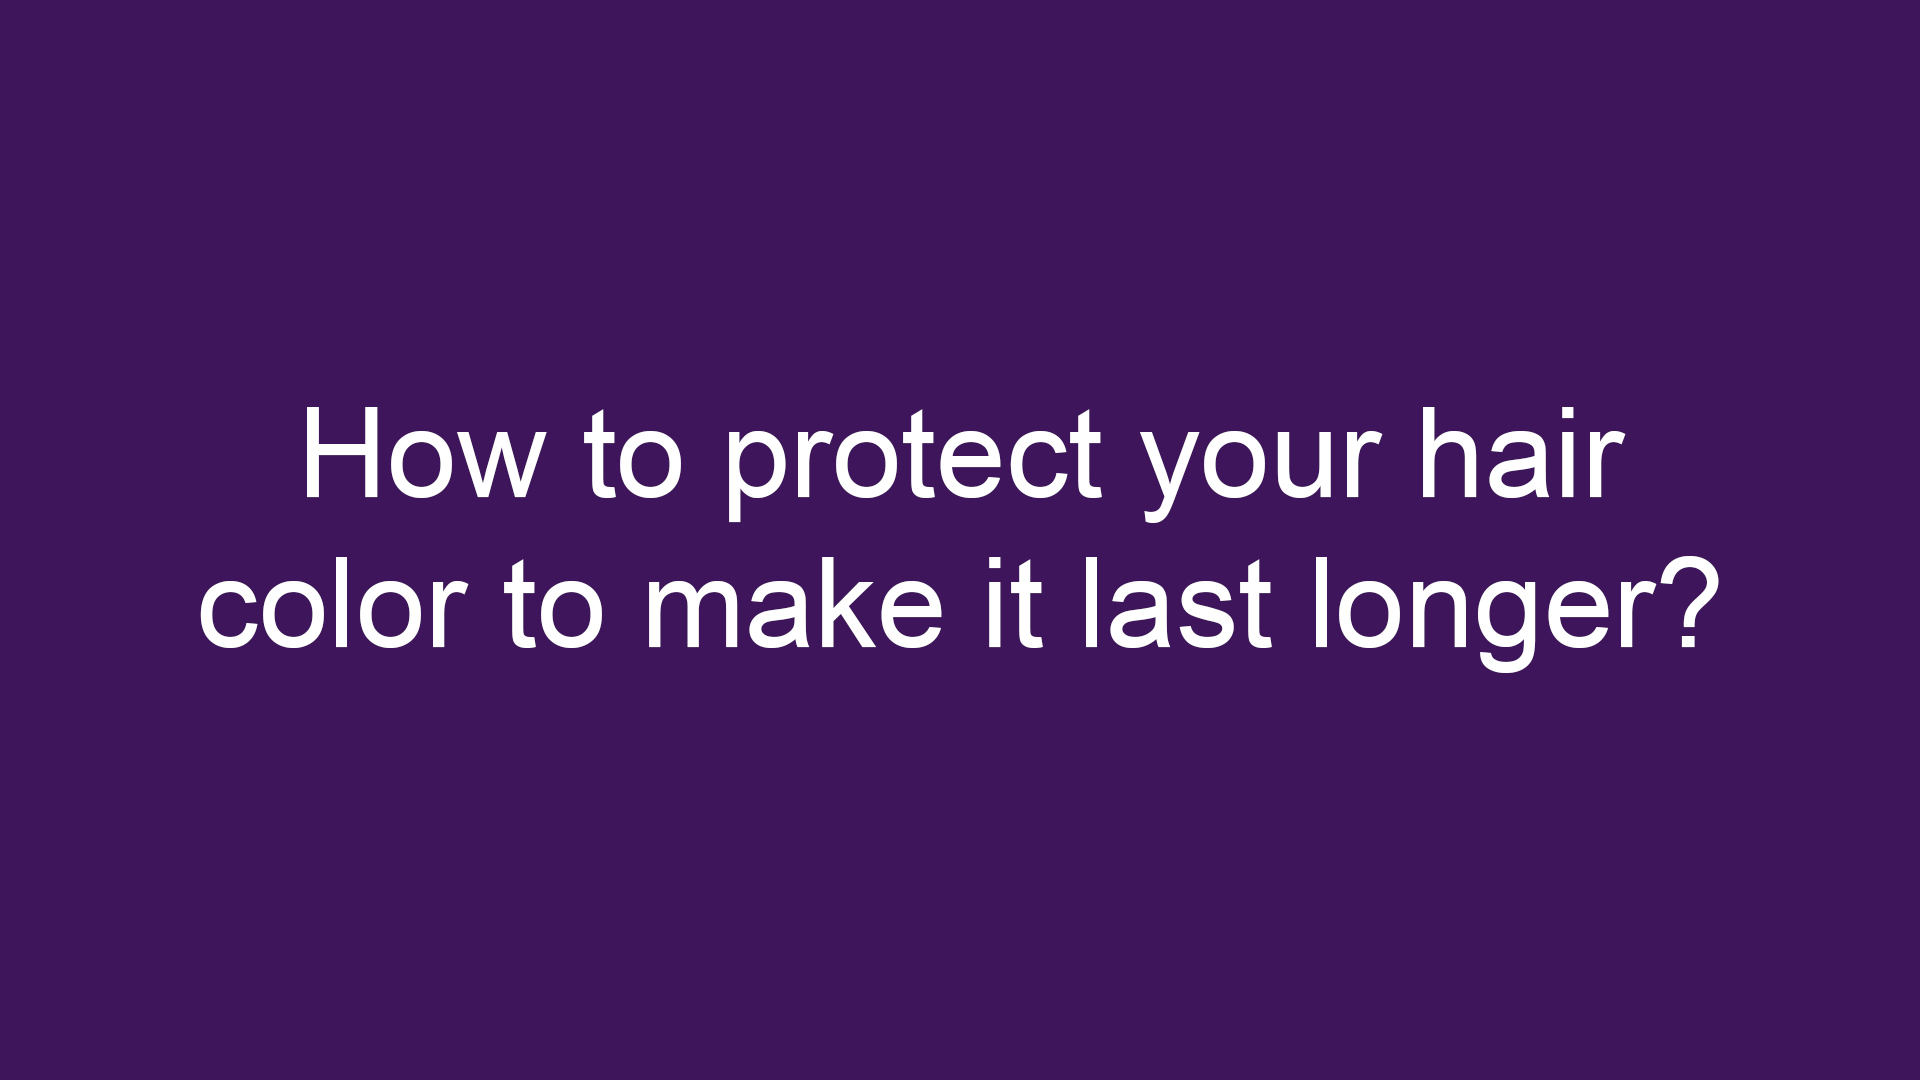 How to protect your hair color to make it last longer